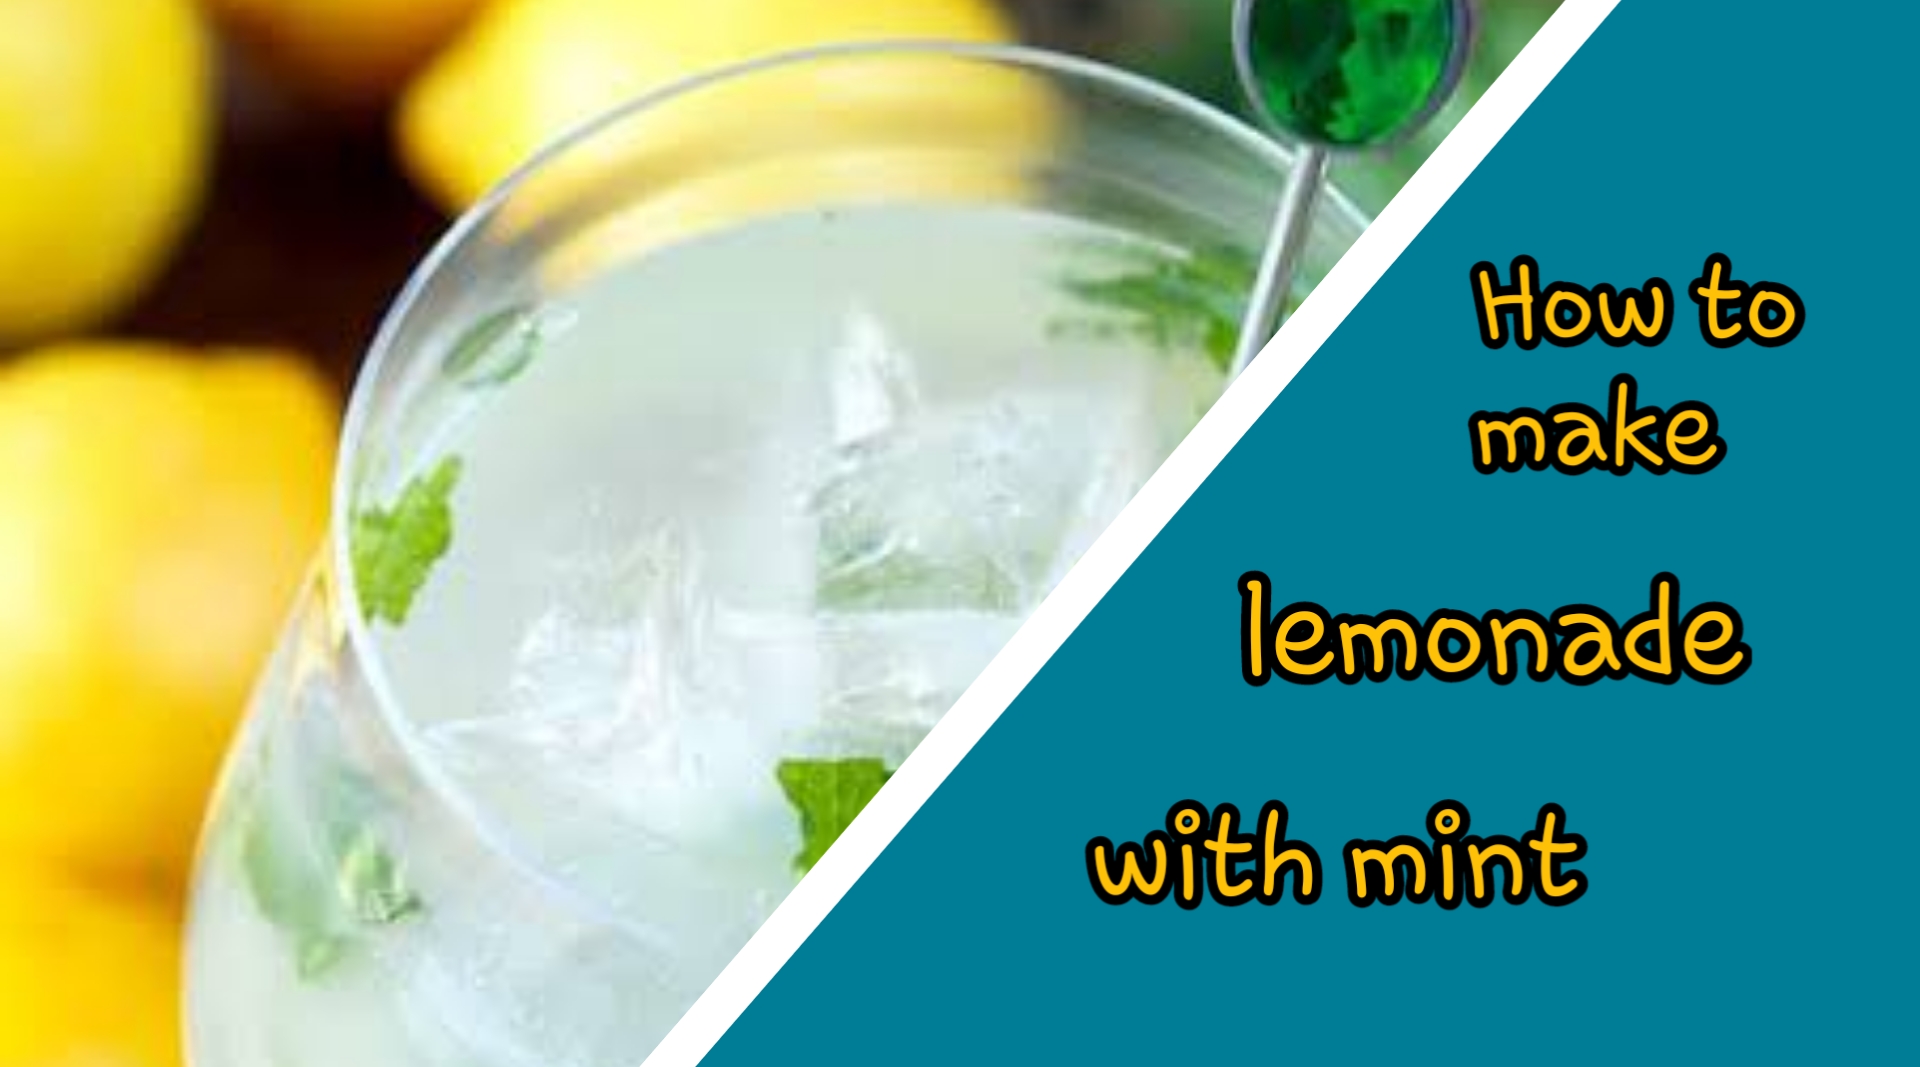 How to make lemonade with mint